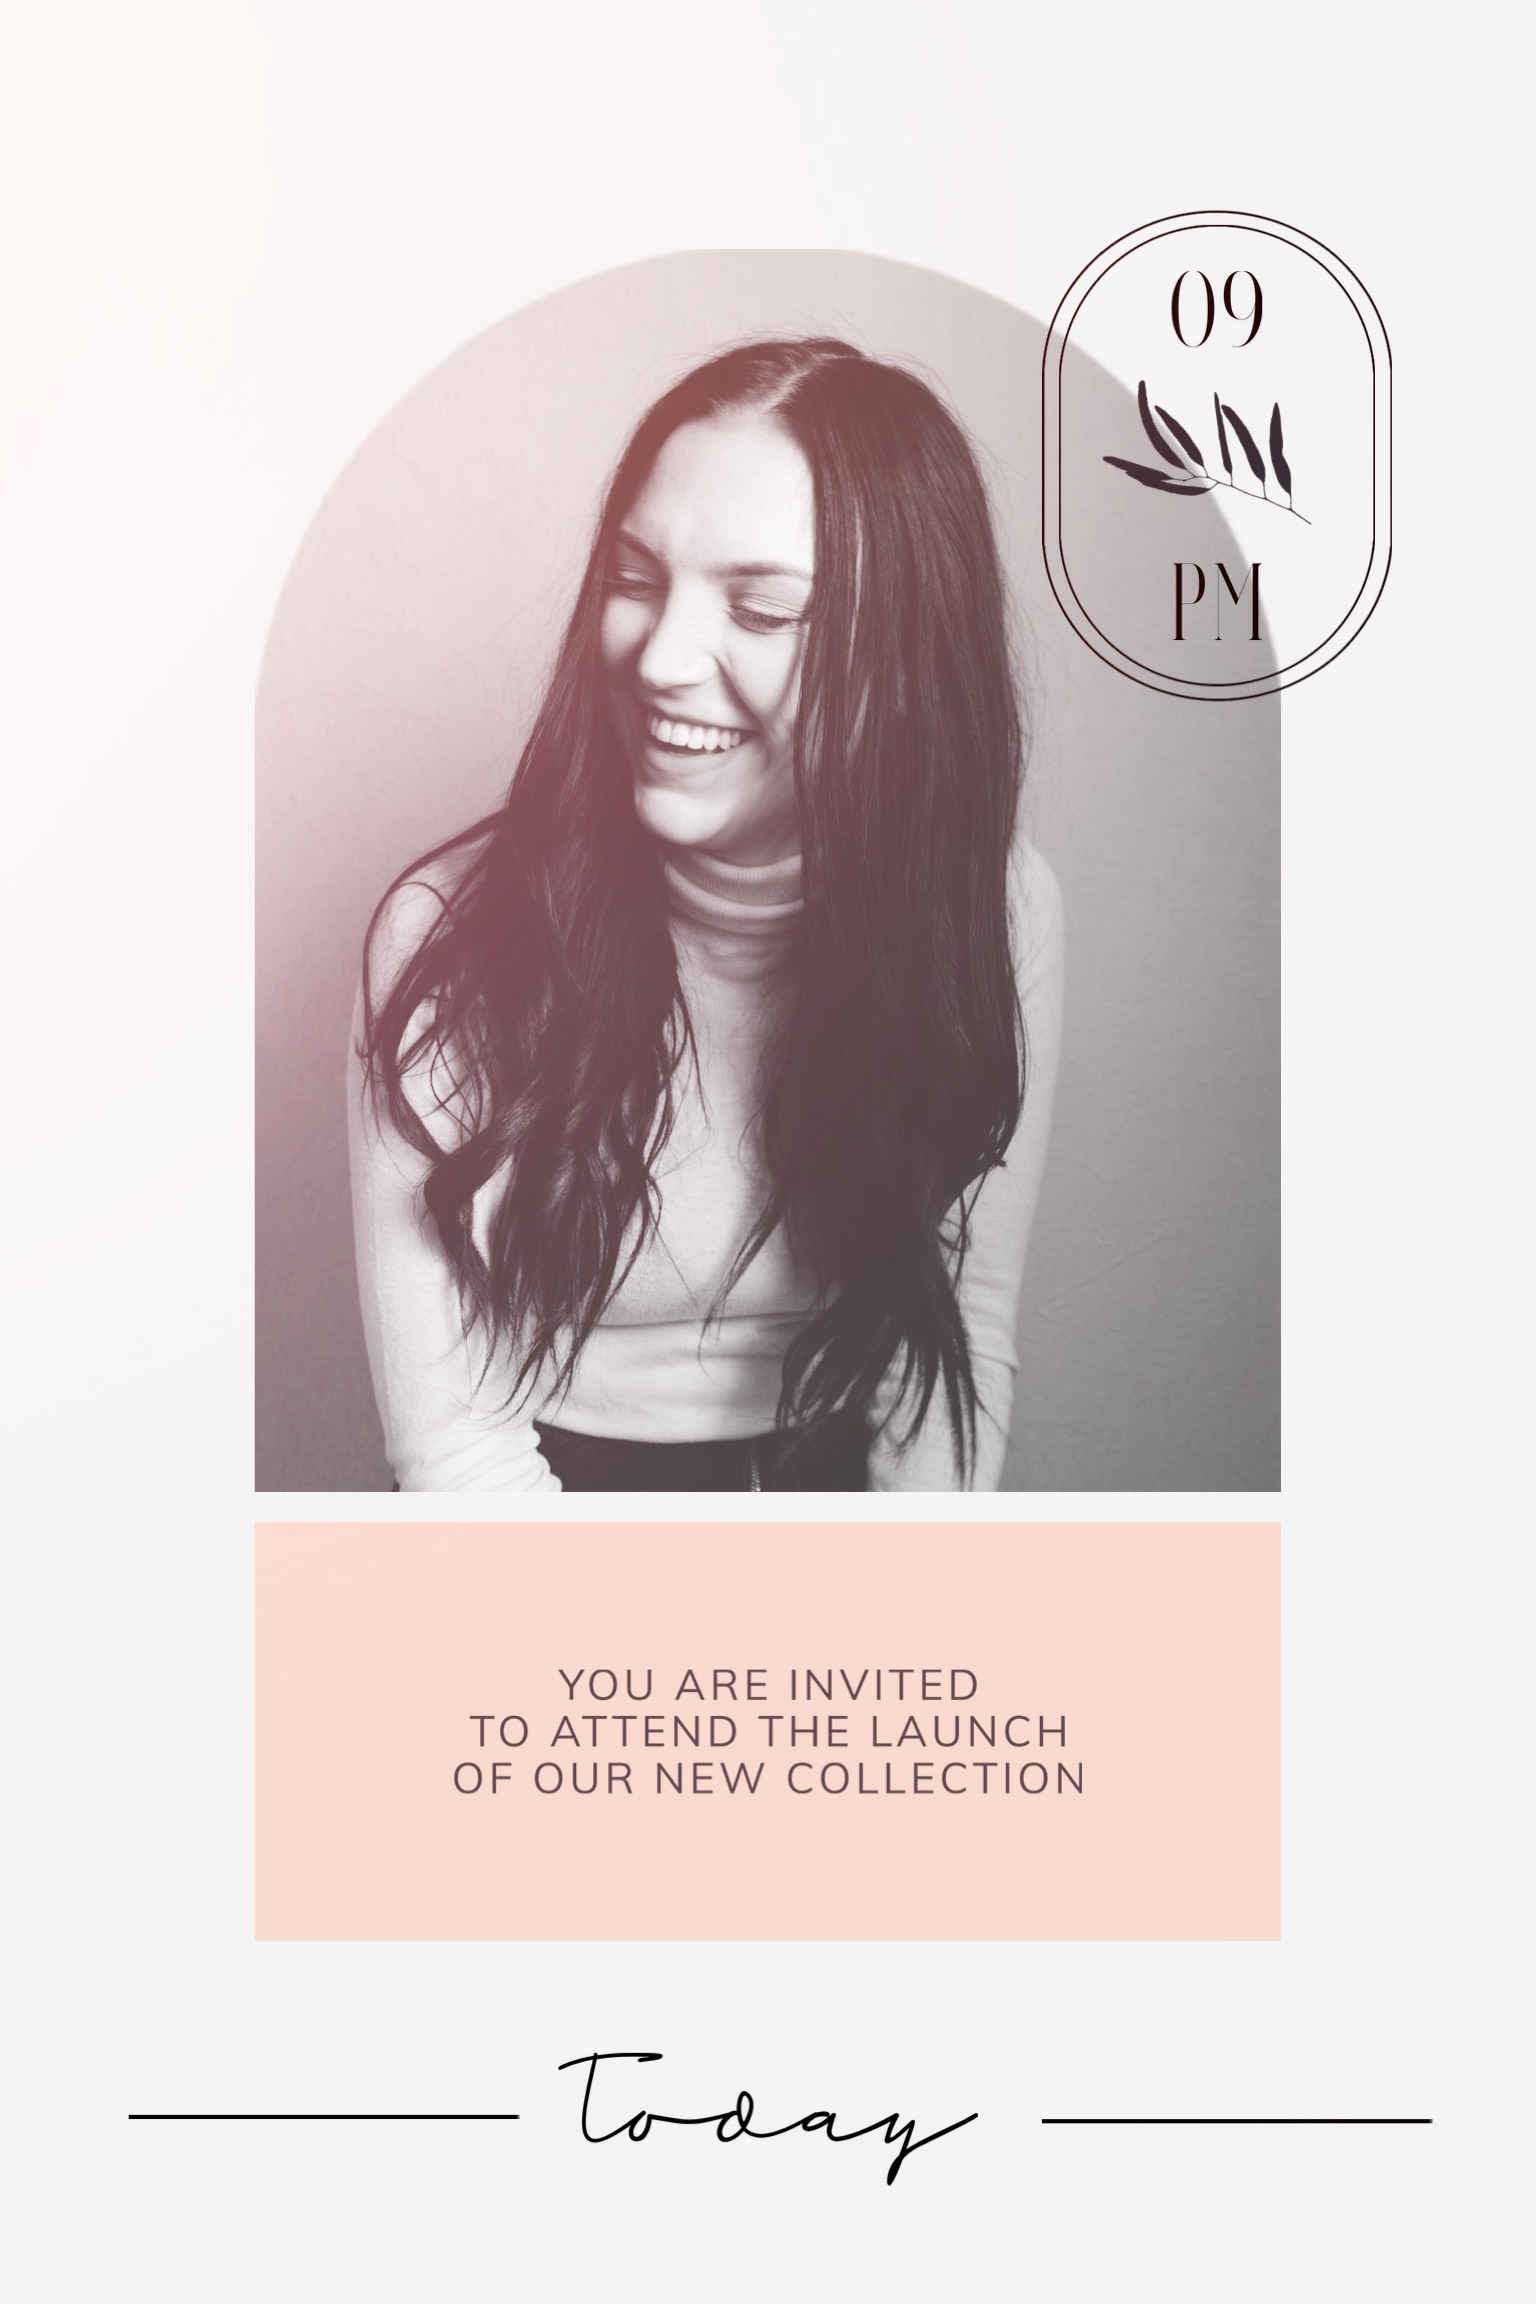 New collection release event invitation template